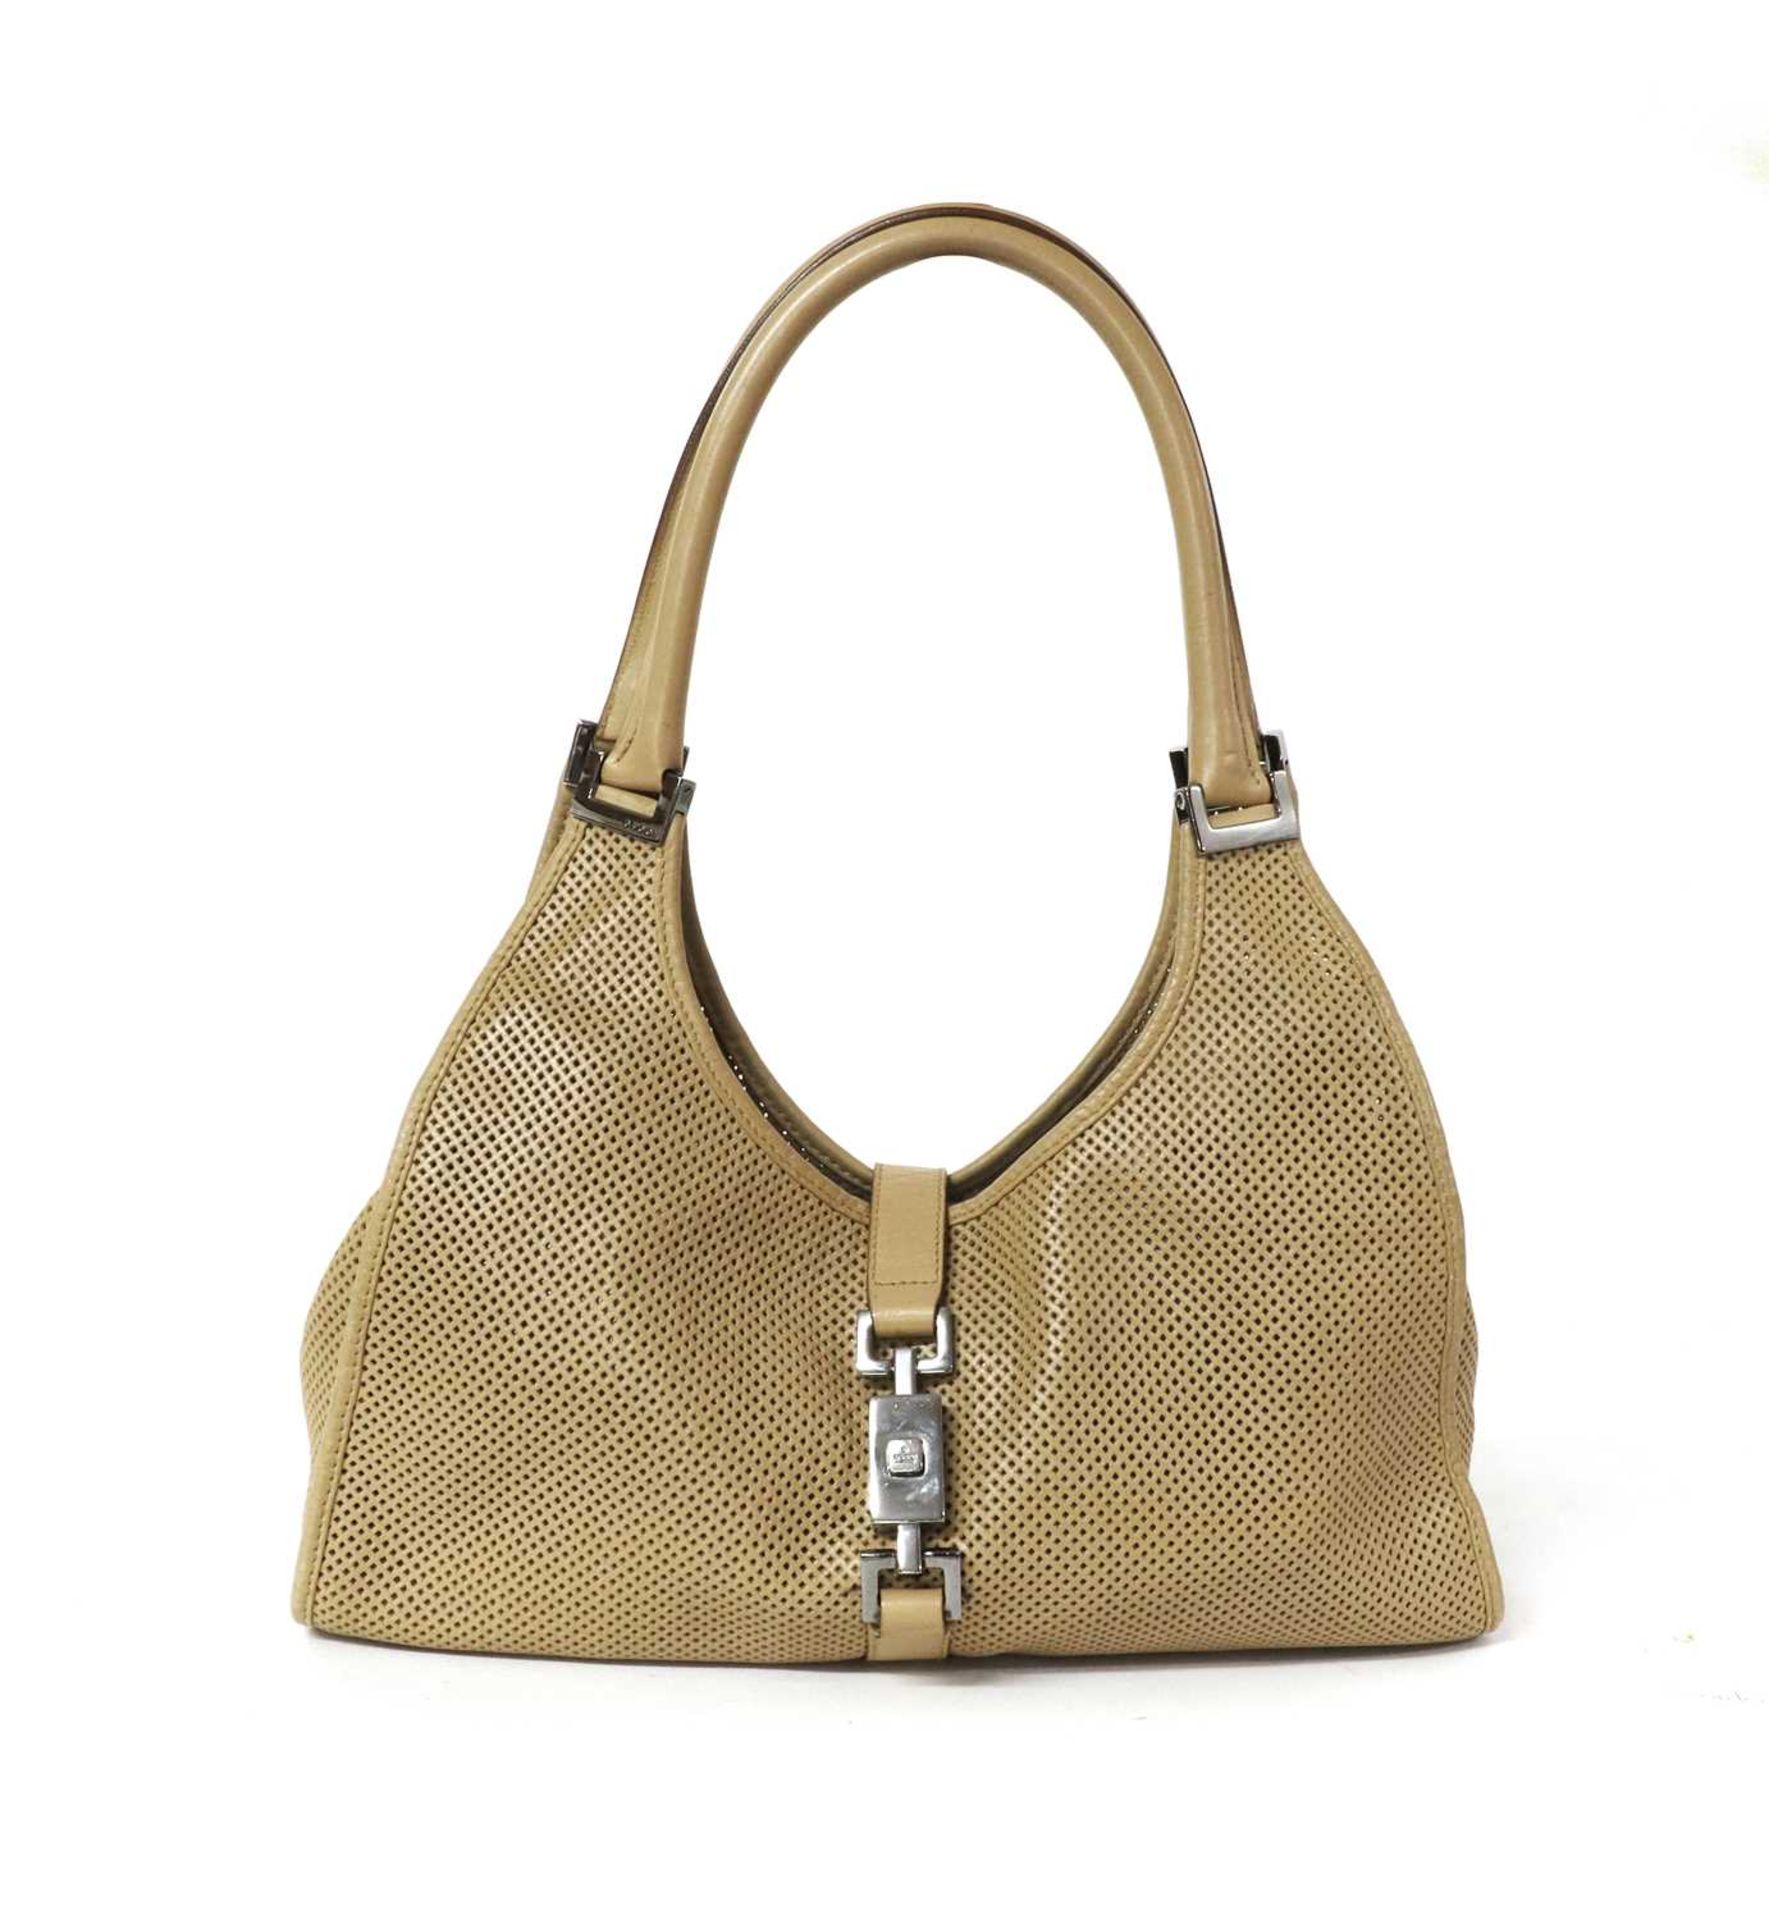 A vintage Gucci tan perforated leather Jackie bag,